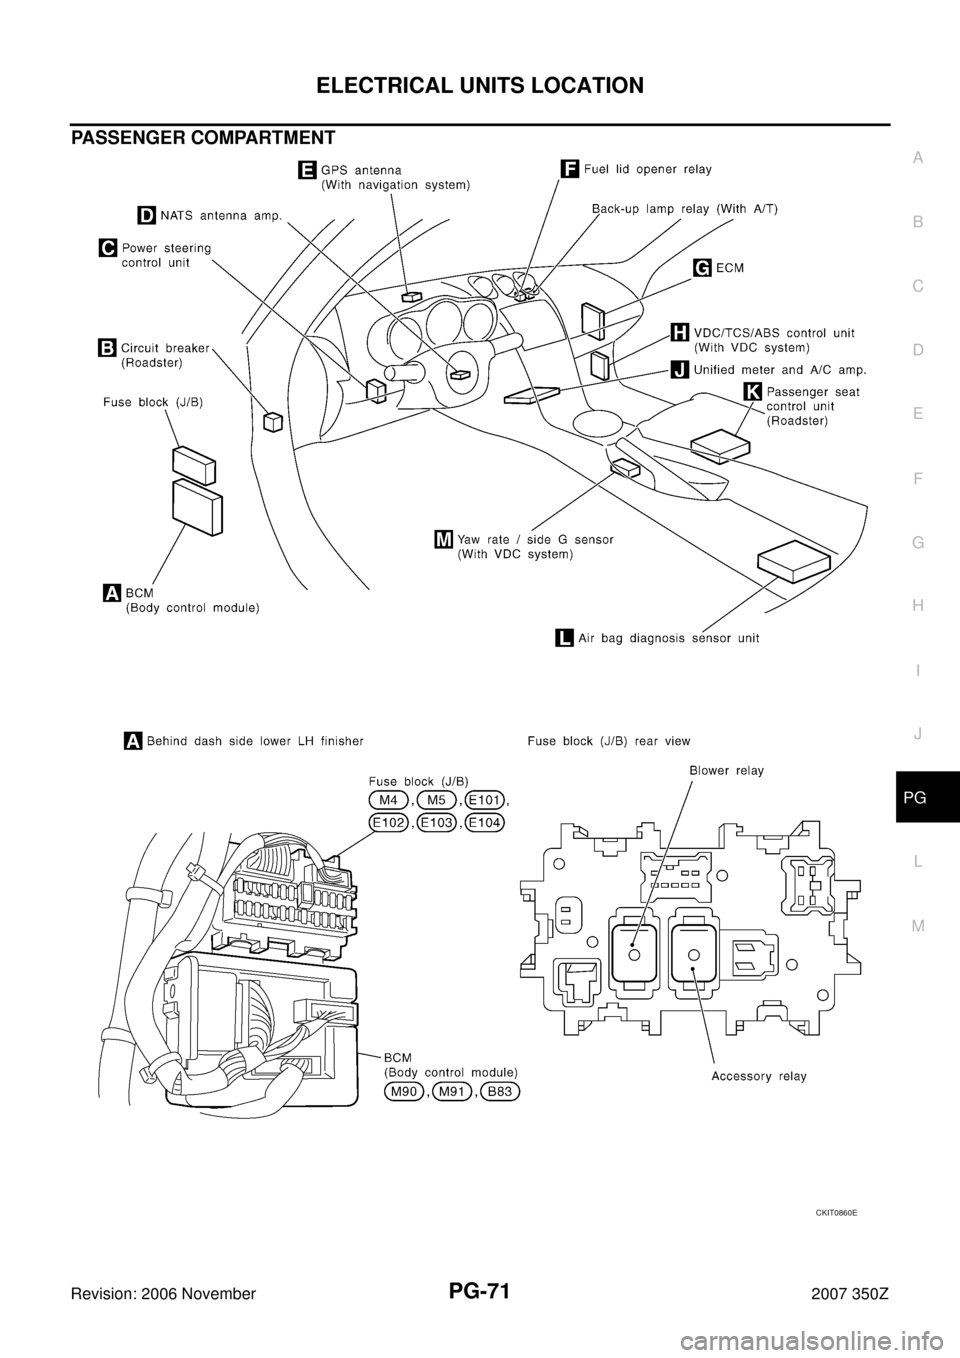 NISSAN 350Z 2007 Z33 Power Supply, Ground And Circuit Manual PDF ELECTRICAL UNITS LOCATION
PG-71
C
D
E
F
G
H
I
J
L
MA
B
PG
Revision: 2006 November2007 350Z
PASSENGER COMPARTMENT
CKIT0860E 